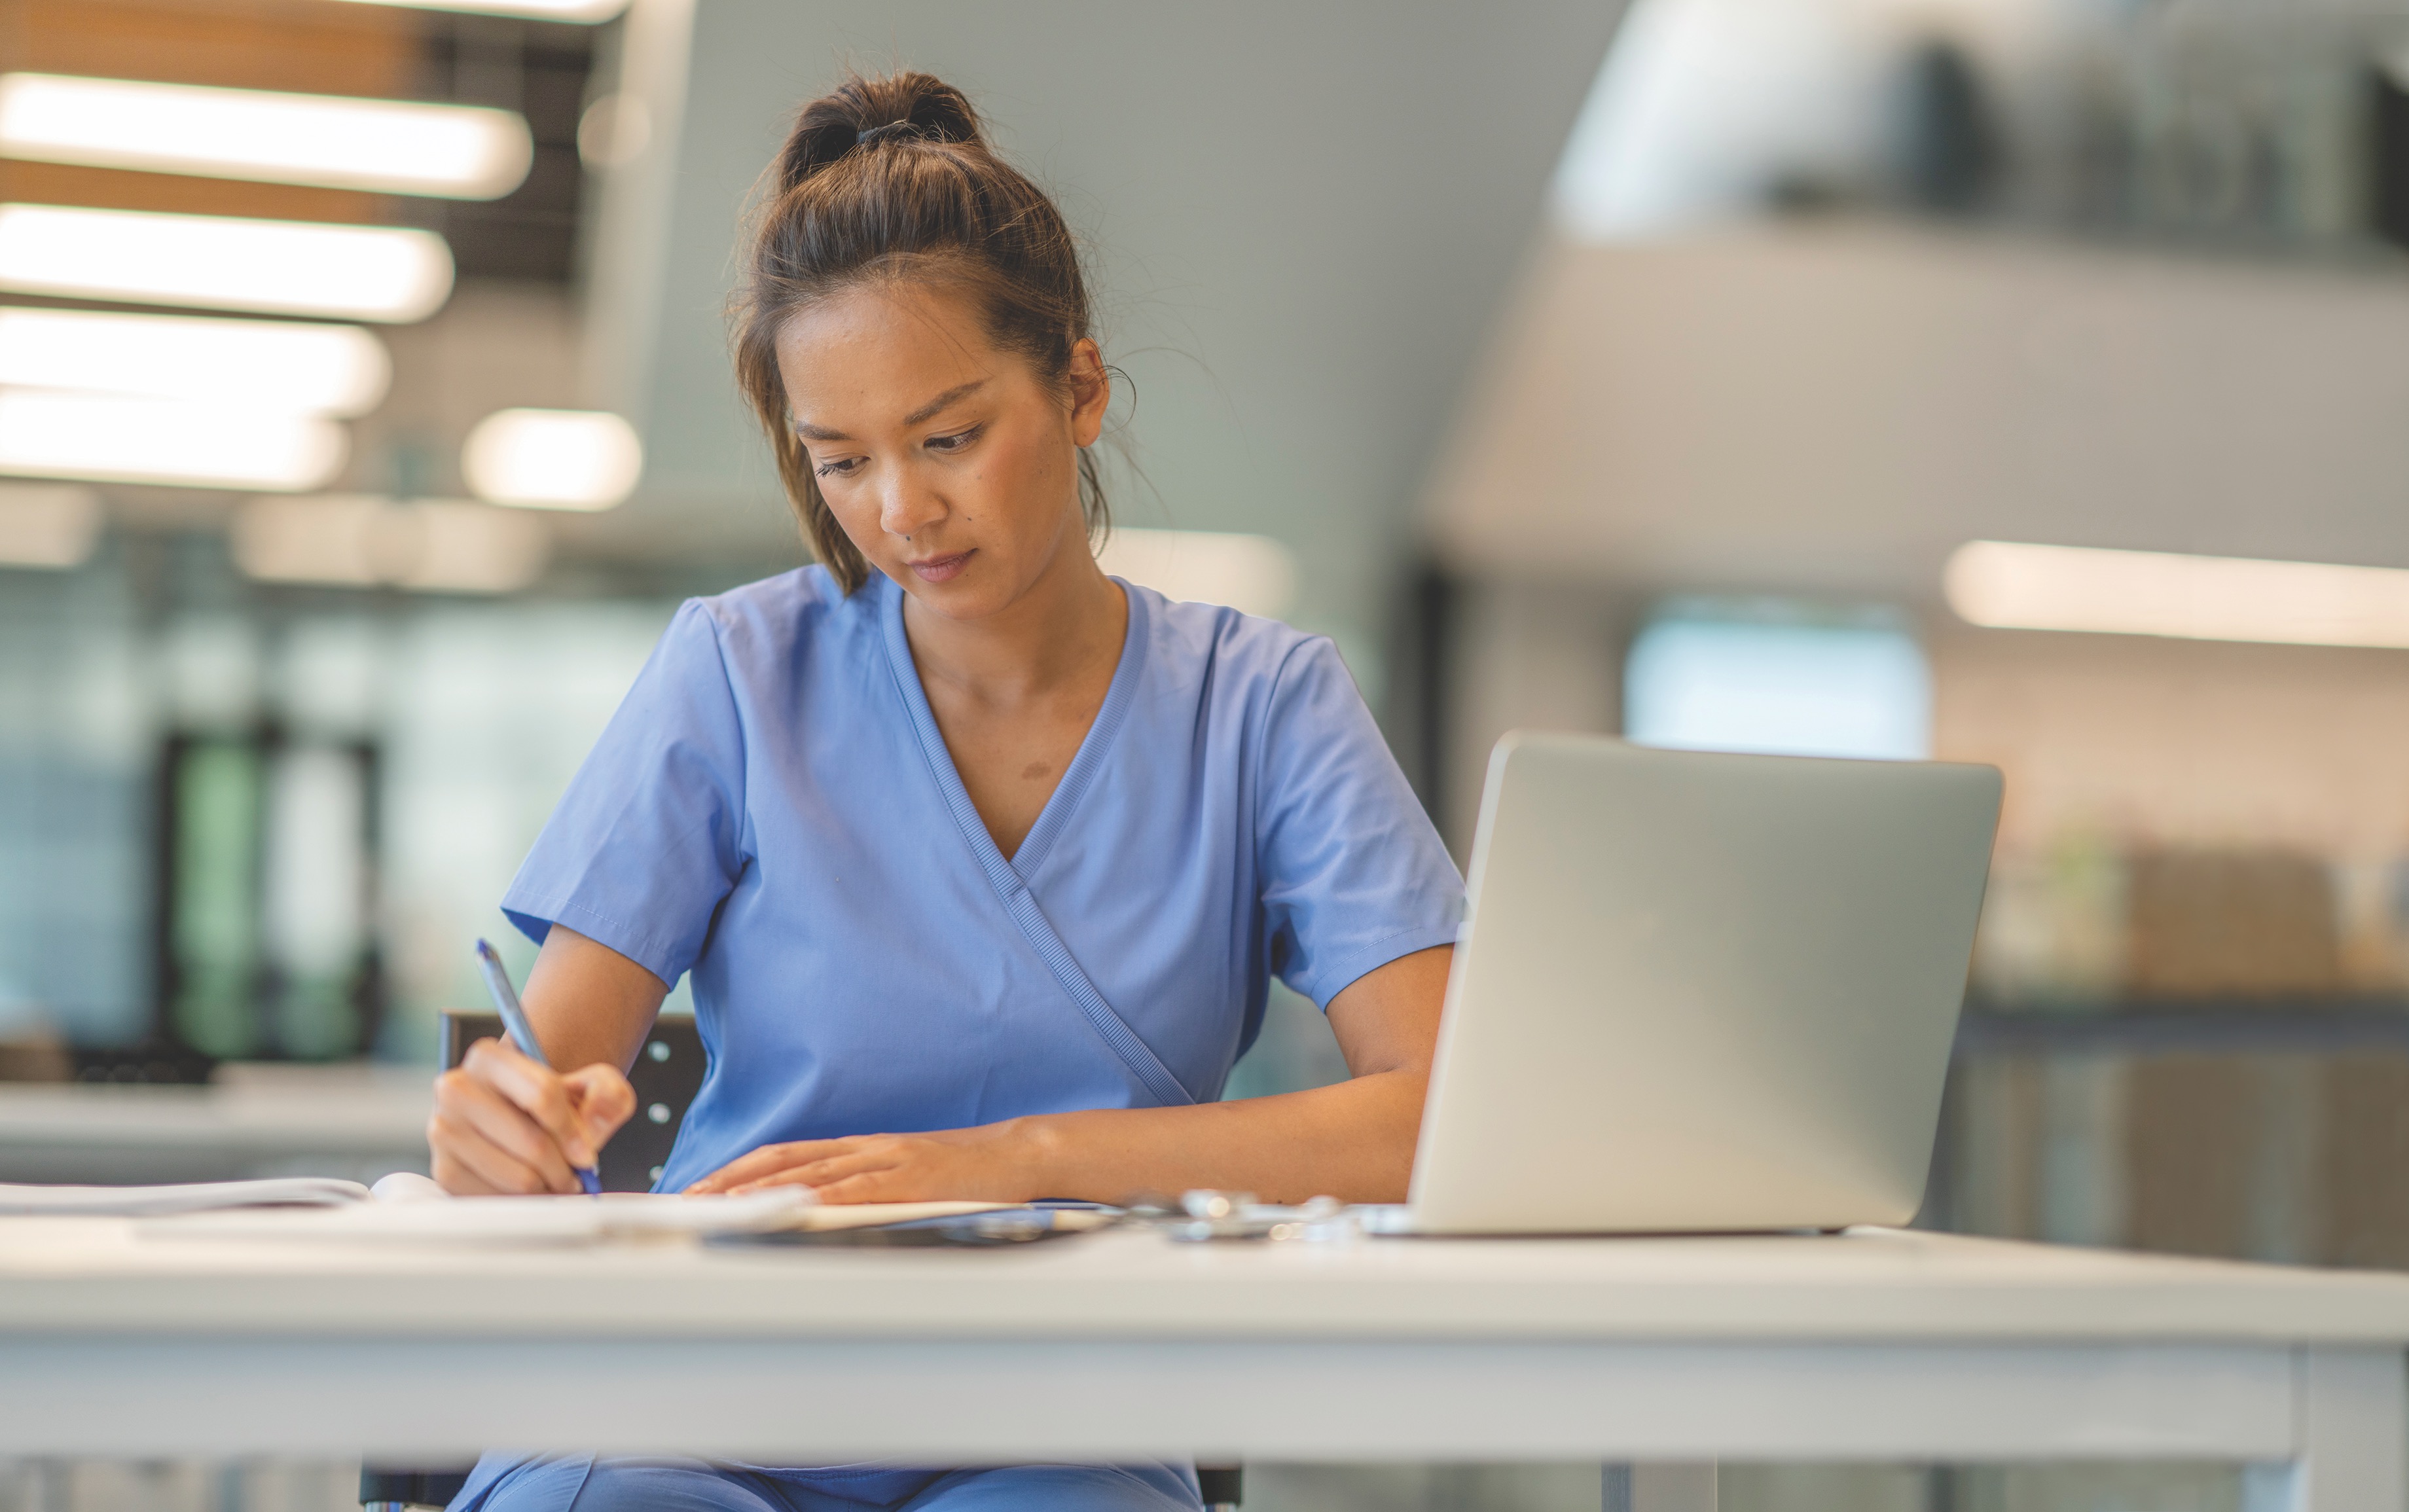 Nurse working at table with laptop